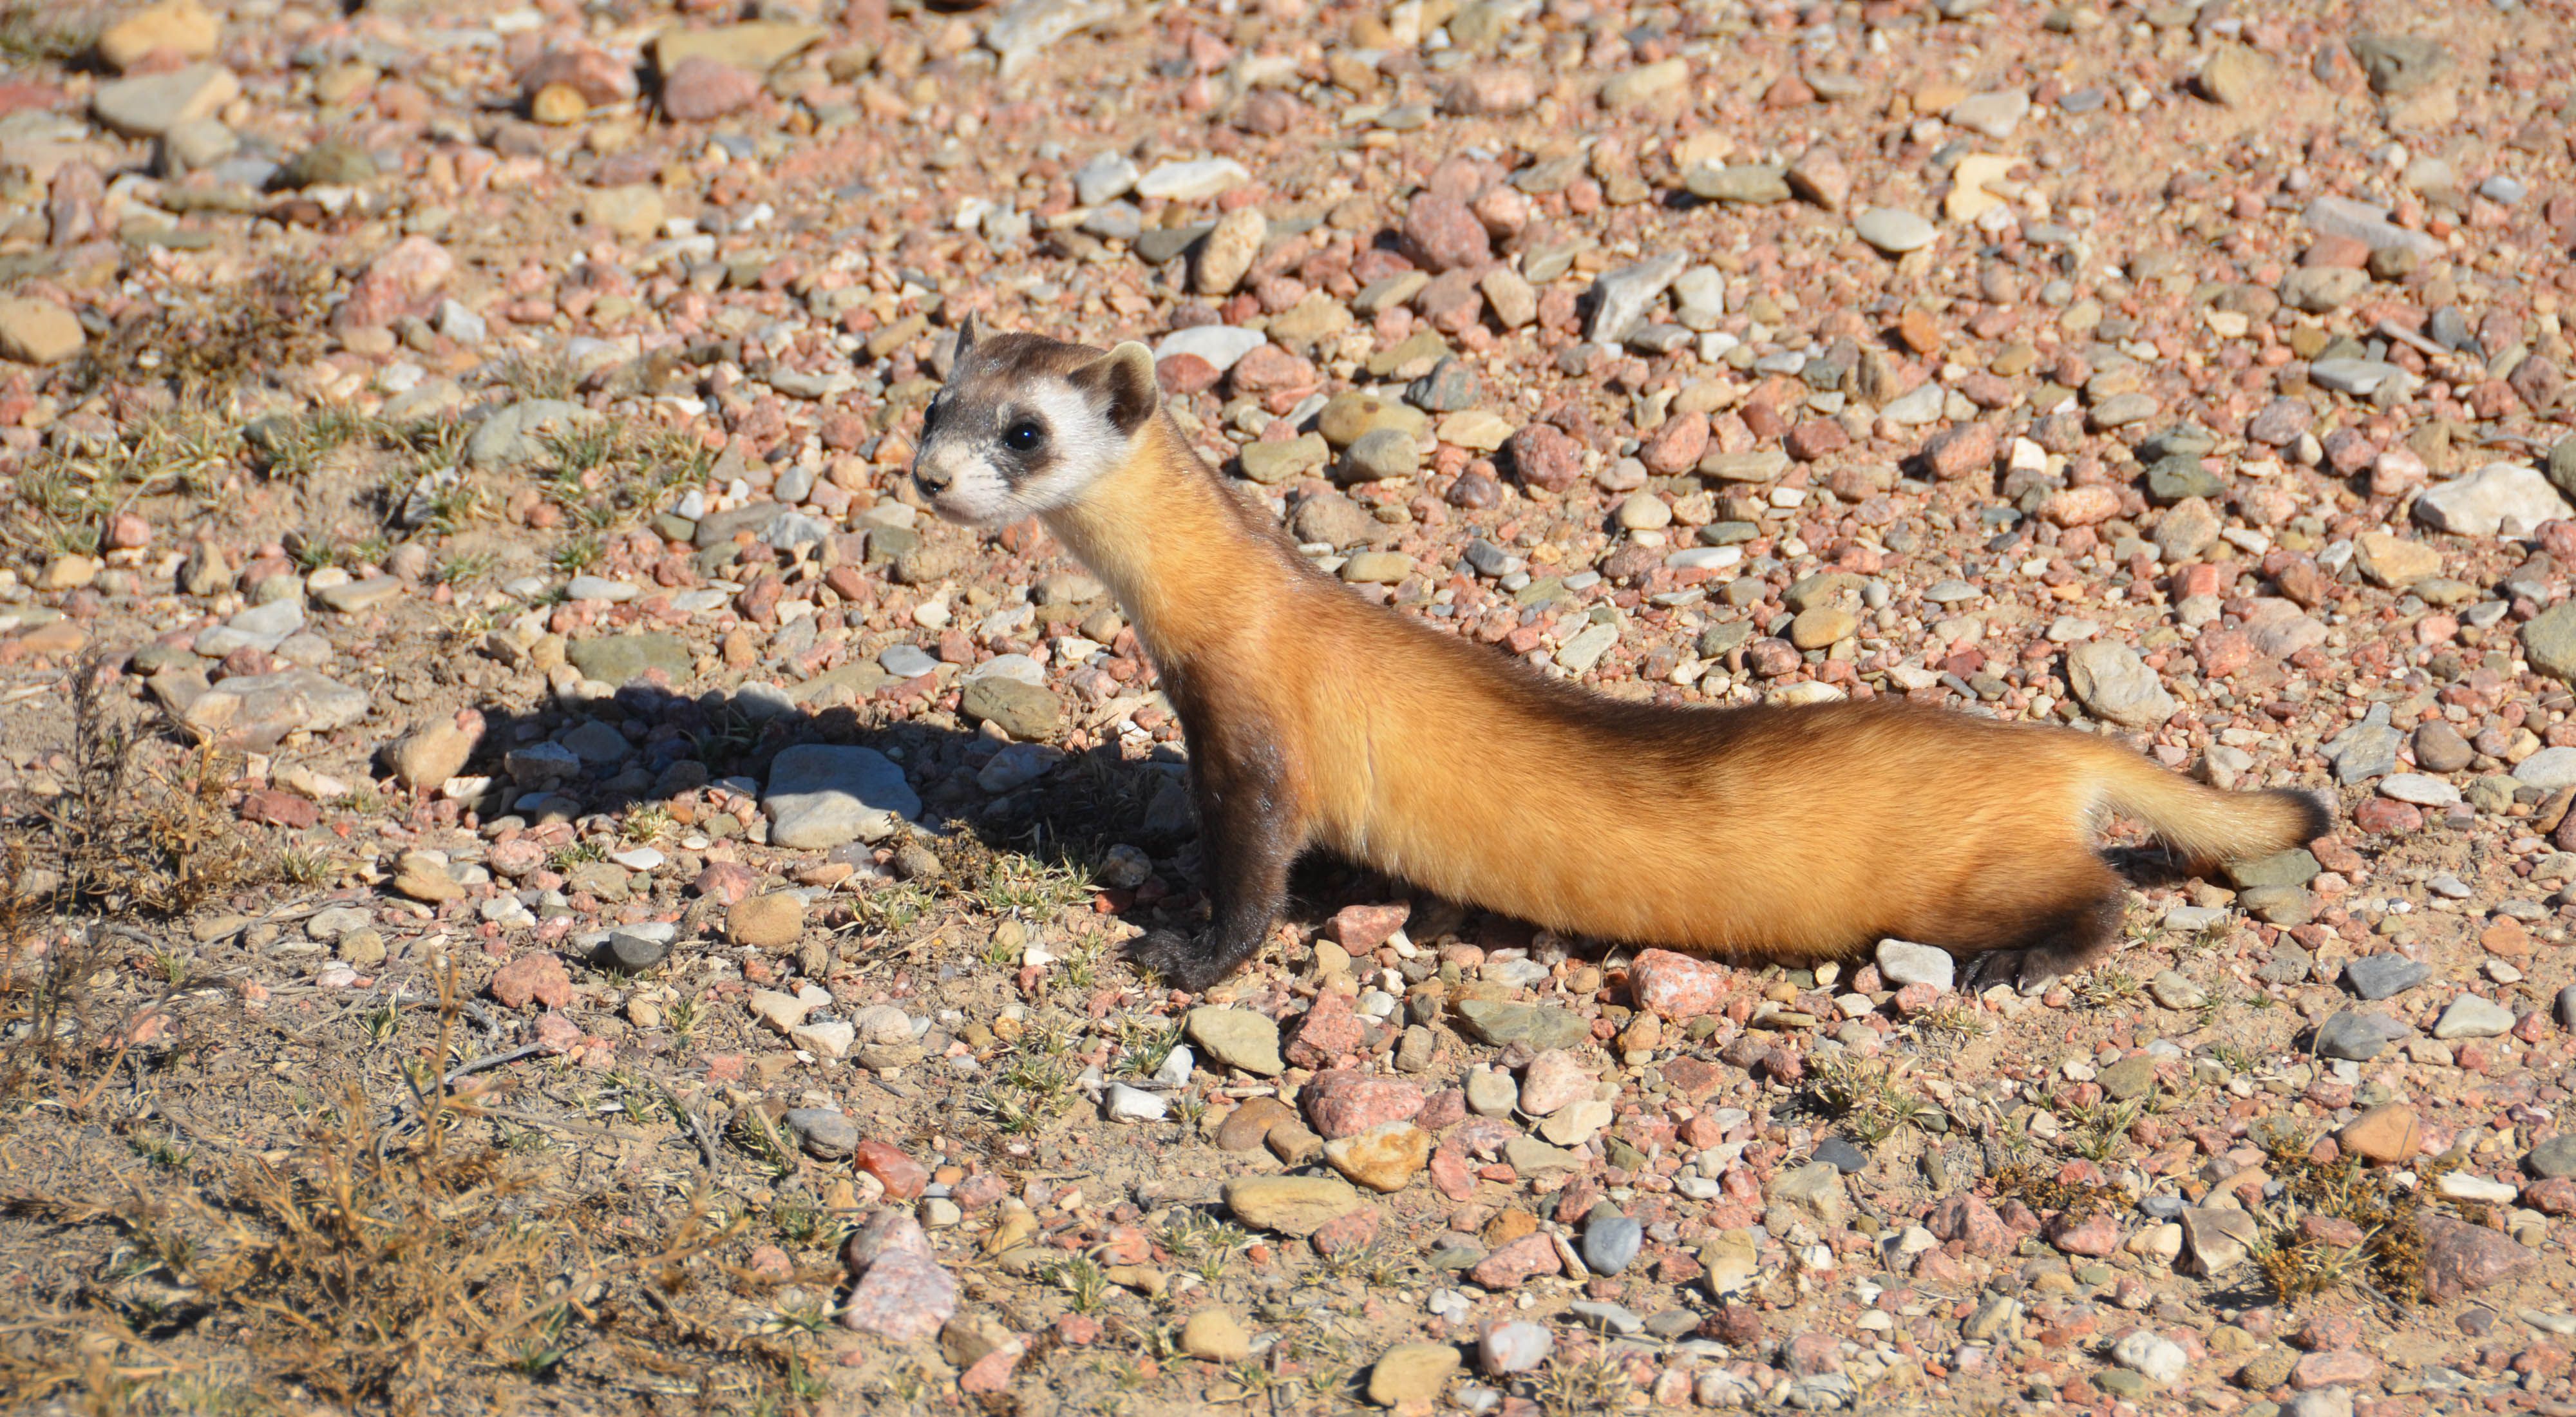 A black-footed ferret standing on pebbles stretches its neck up and out looking at something off to the side.